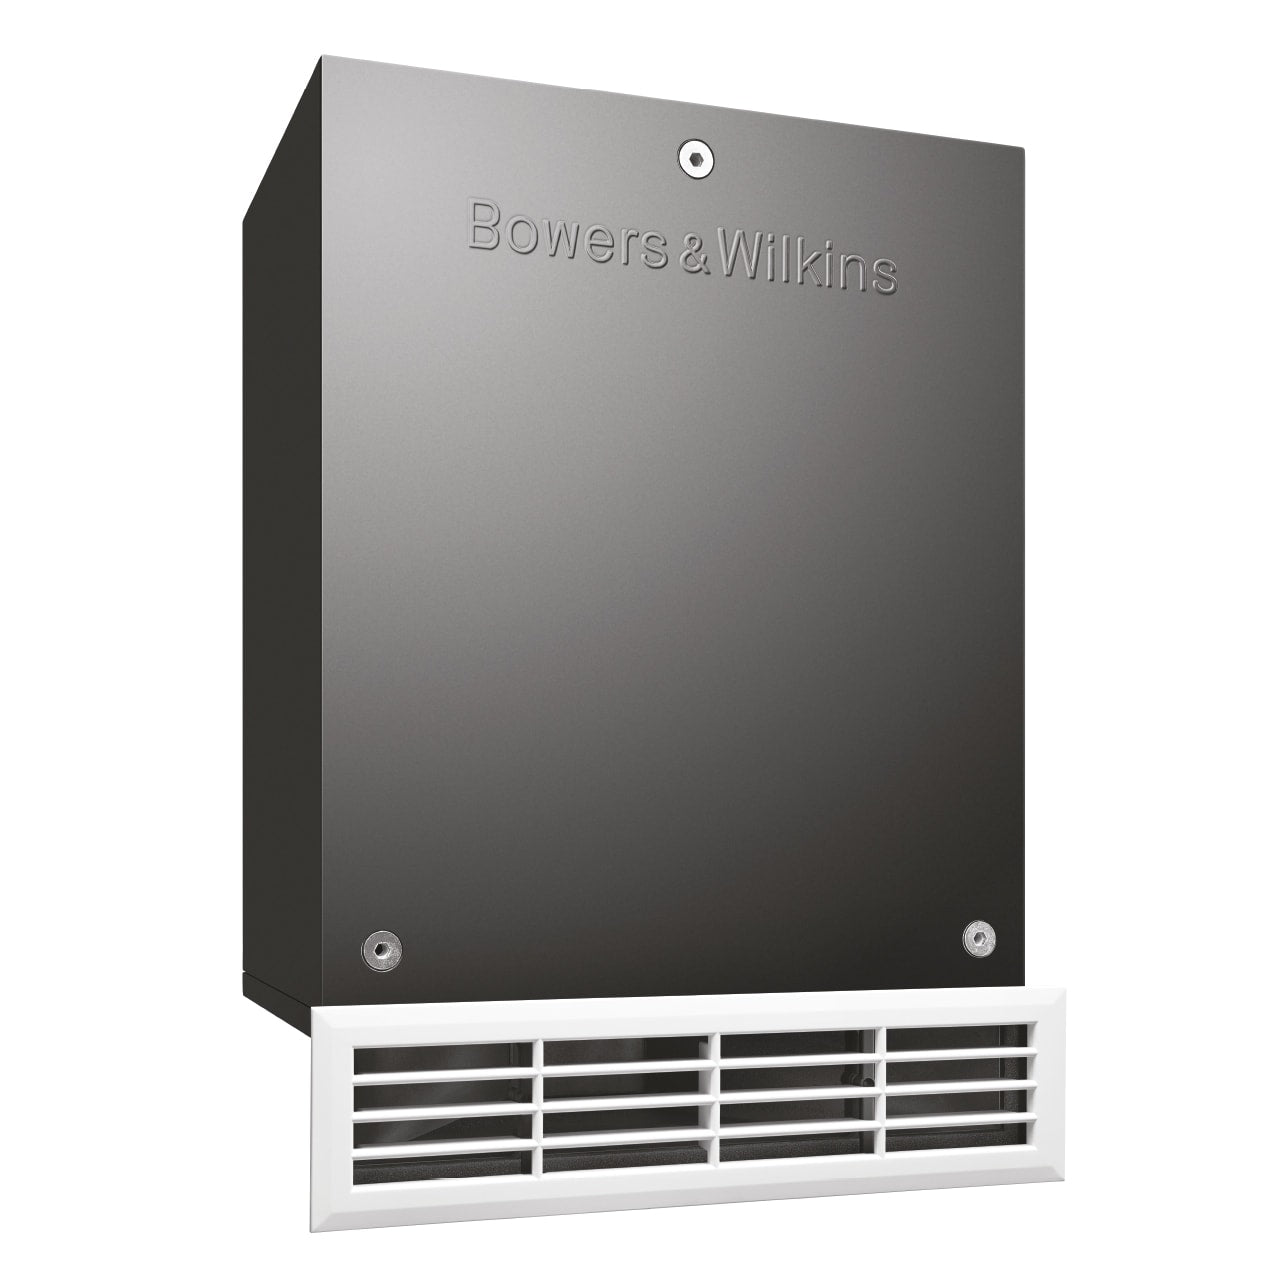 Bowers & Wilkins ISW-3